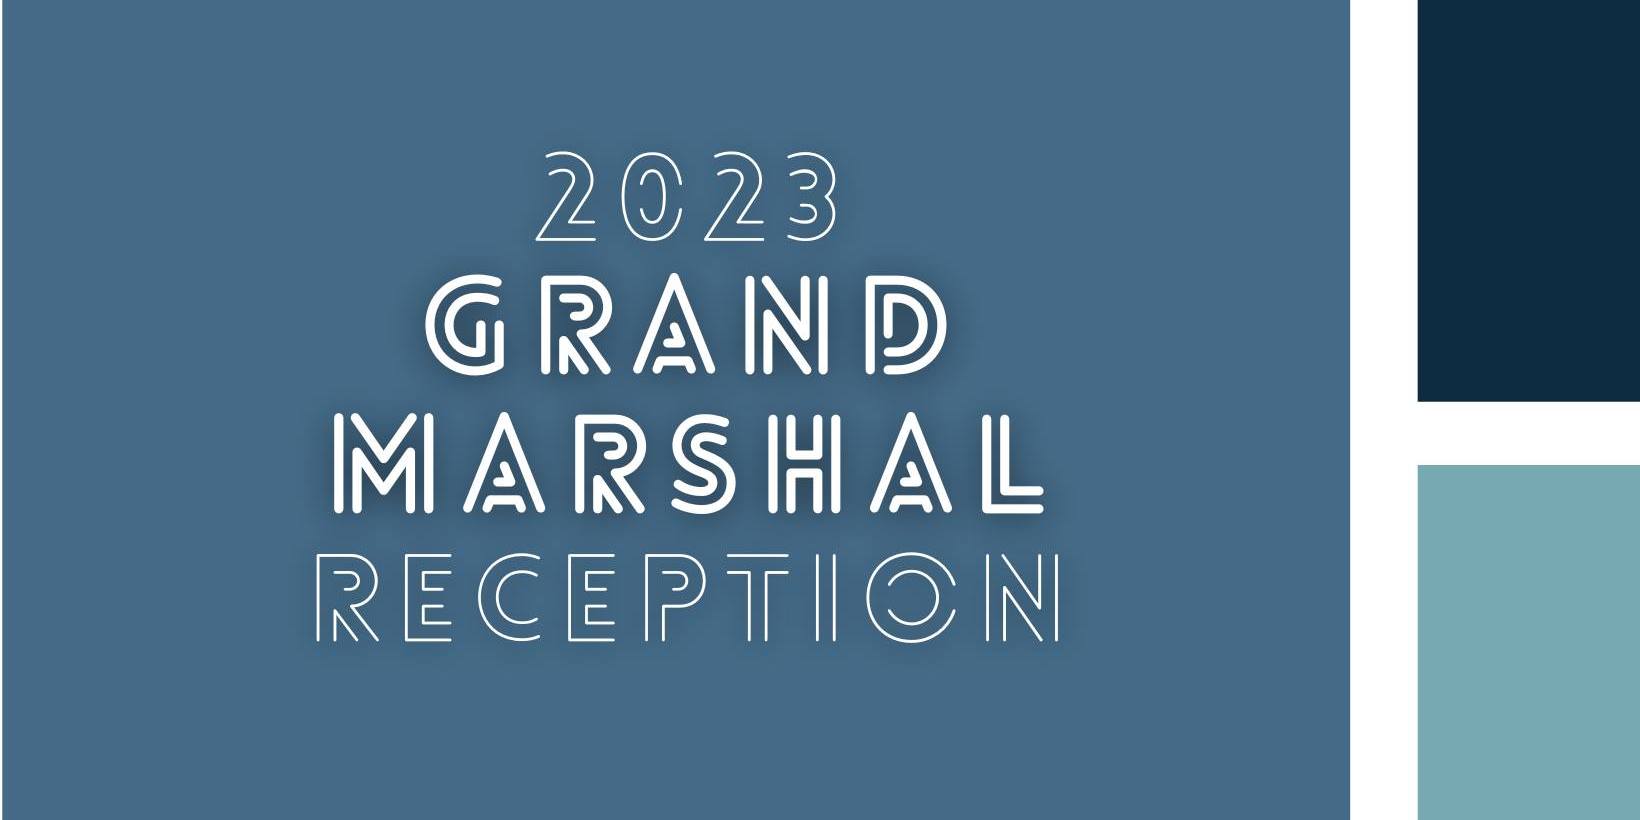 Twin Cities Pride 2023 Grand Marshal Reception promotional image